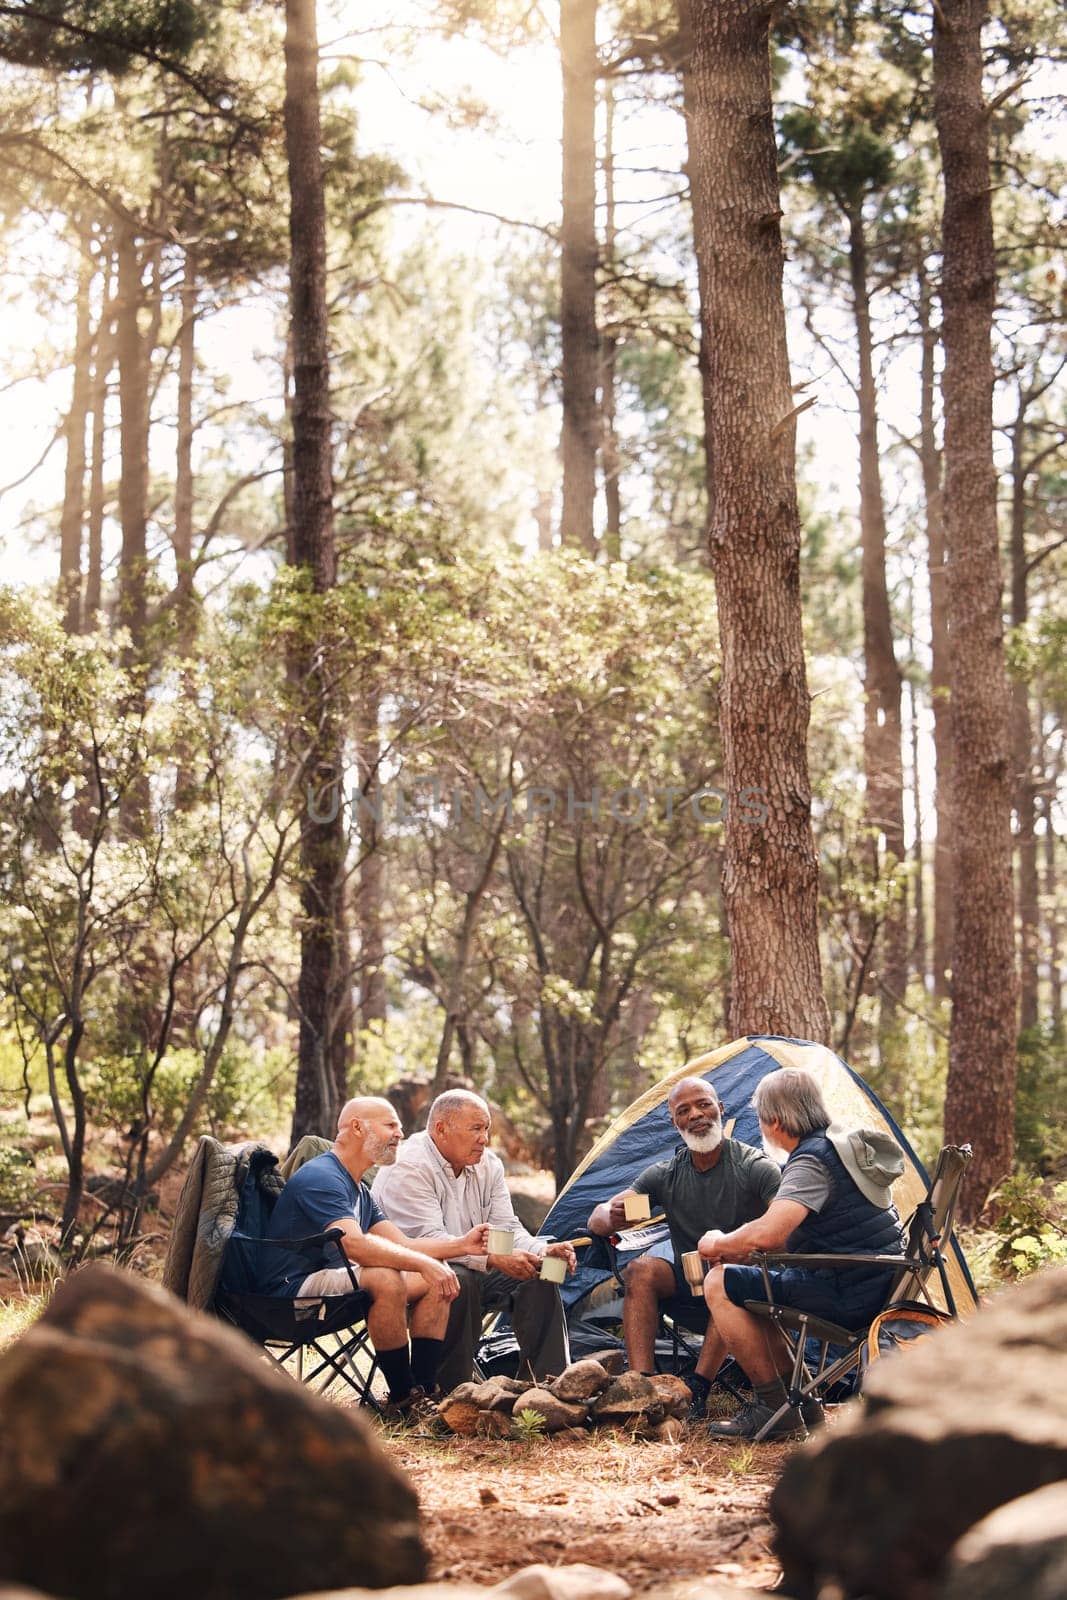 Man, people and camping in nature for travel, adventure or summer vacation together with chairs and tent in forest. Group of men relaxing and talking enjoying camp out by tall green trees in outdoors by YuriArcurs